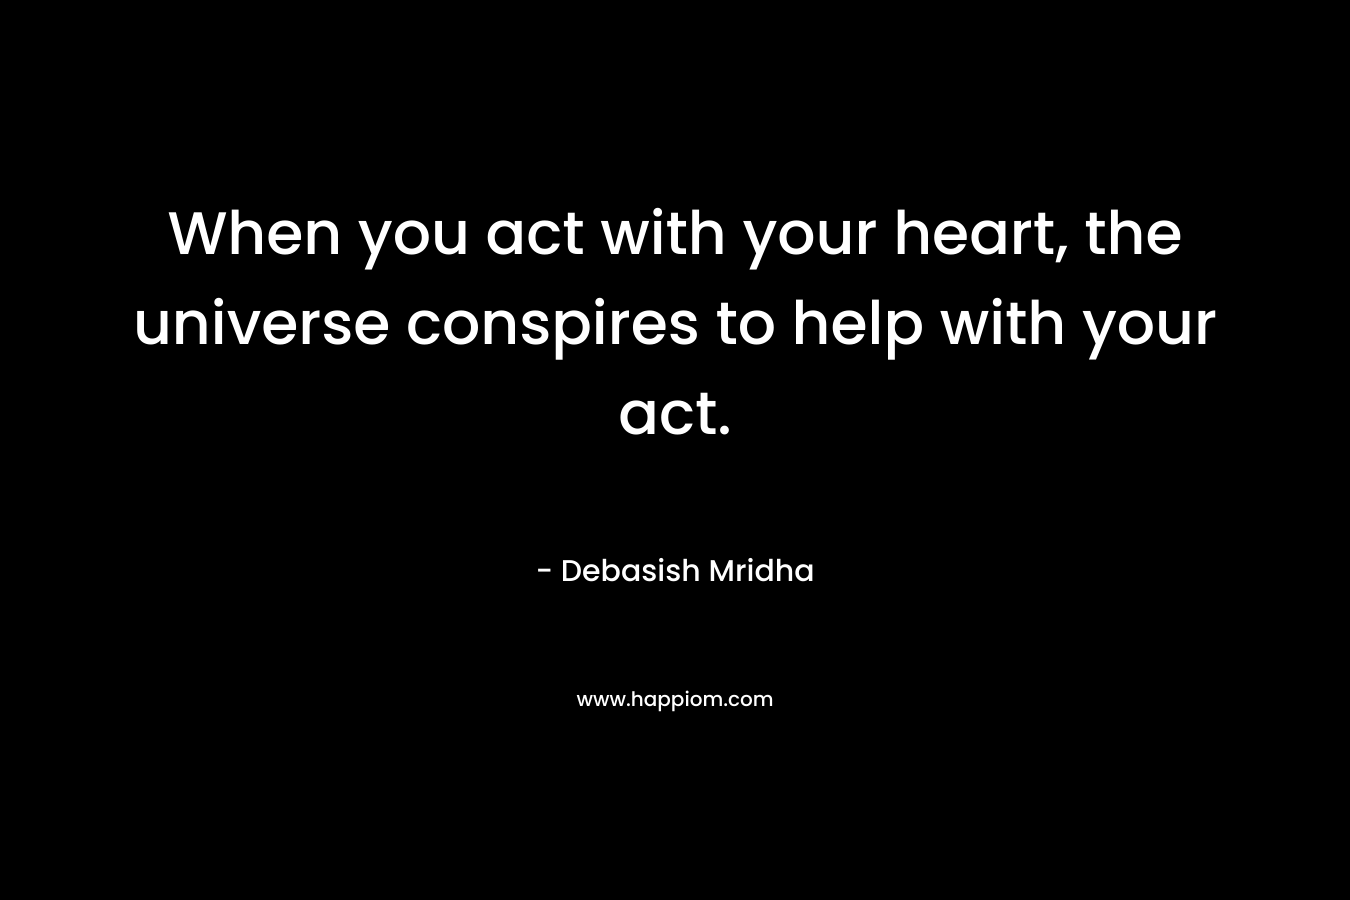 When you act with your heart, the universe conspires to help with your act.